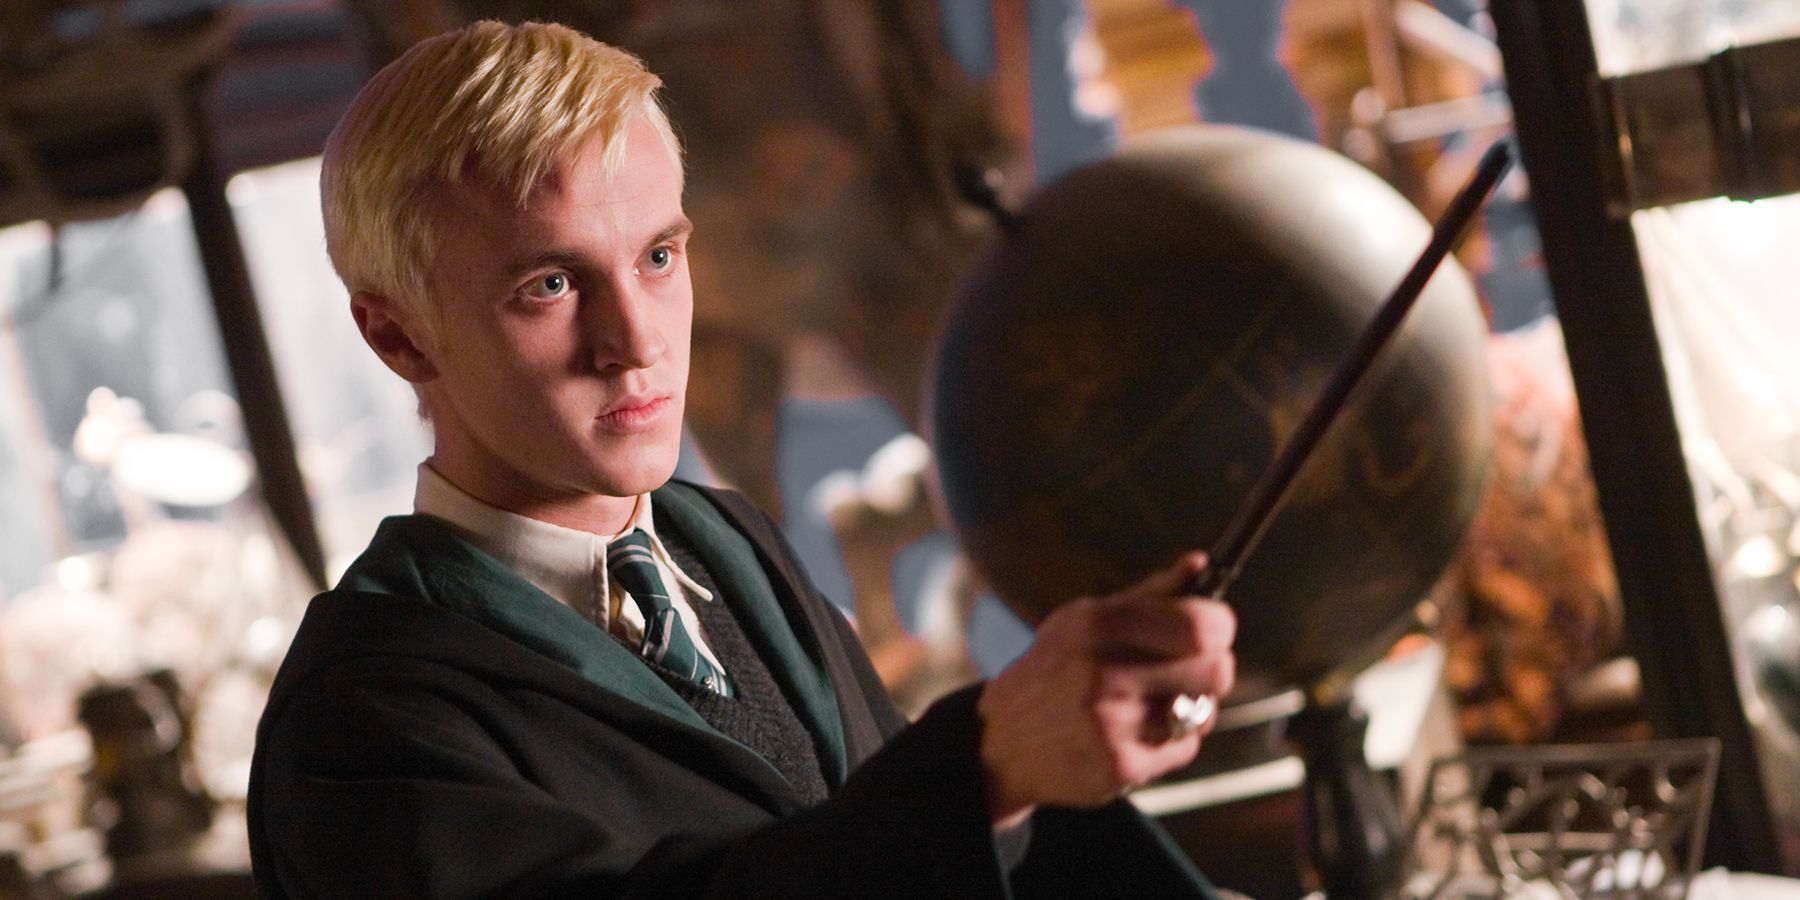 Draco Malfoy (Tom Felton) practices with his wand.